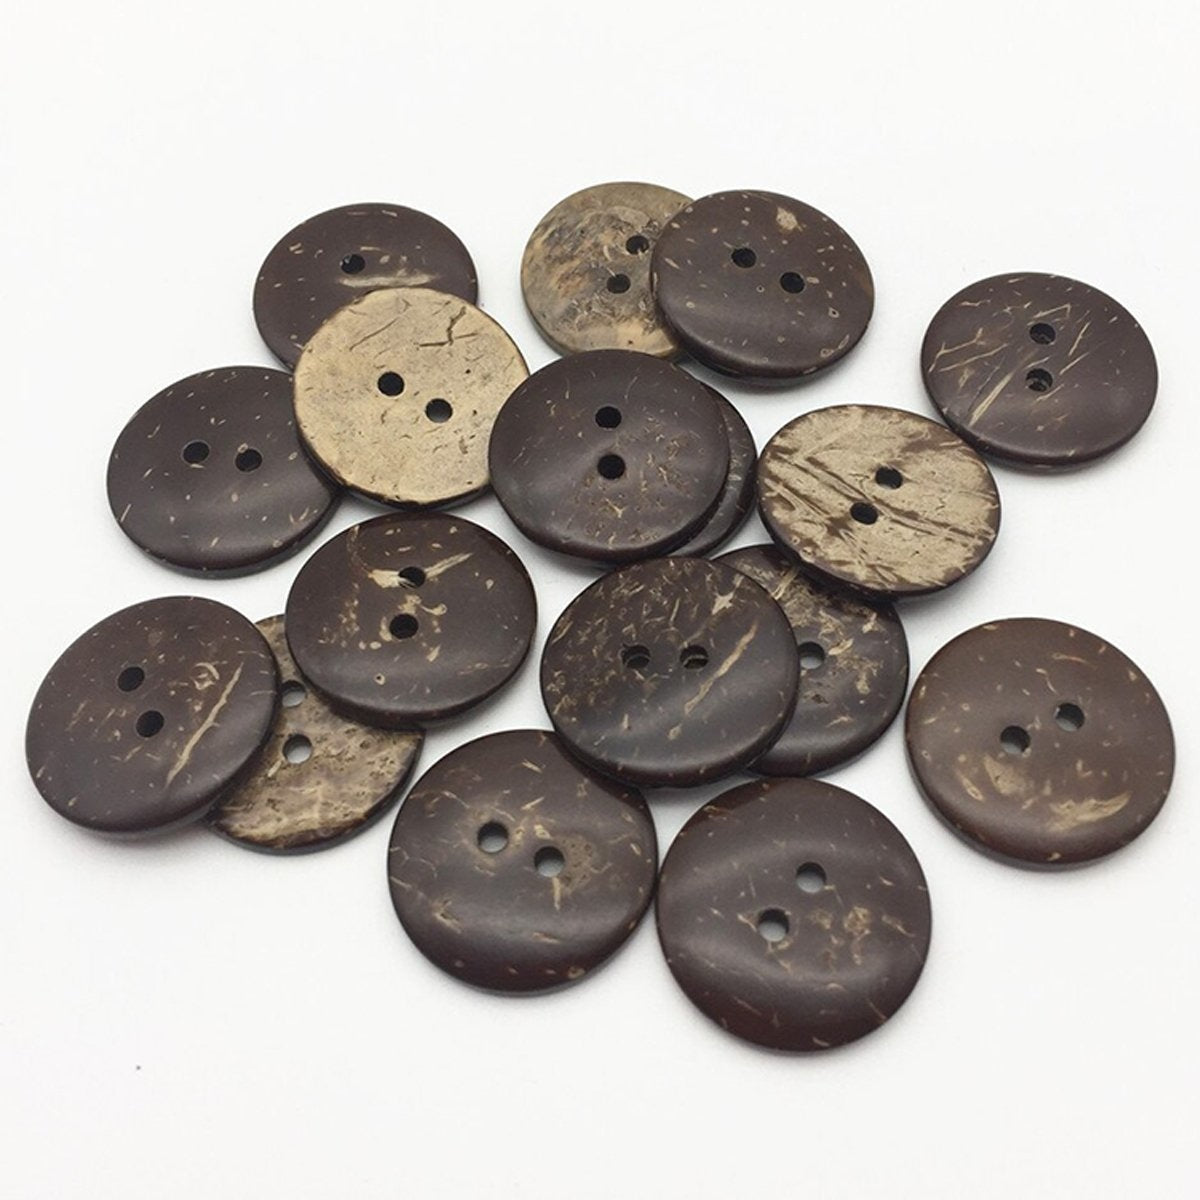 25pcs 2 Holes Clothing Buttons Coconut Shell Round Wooden 15-20mm Sewing